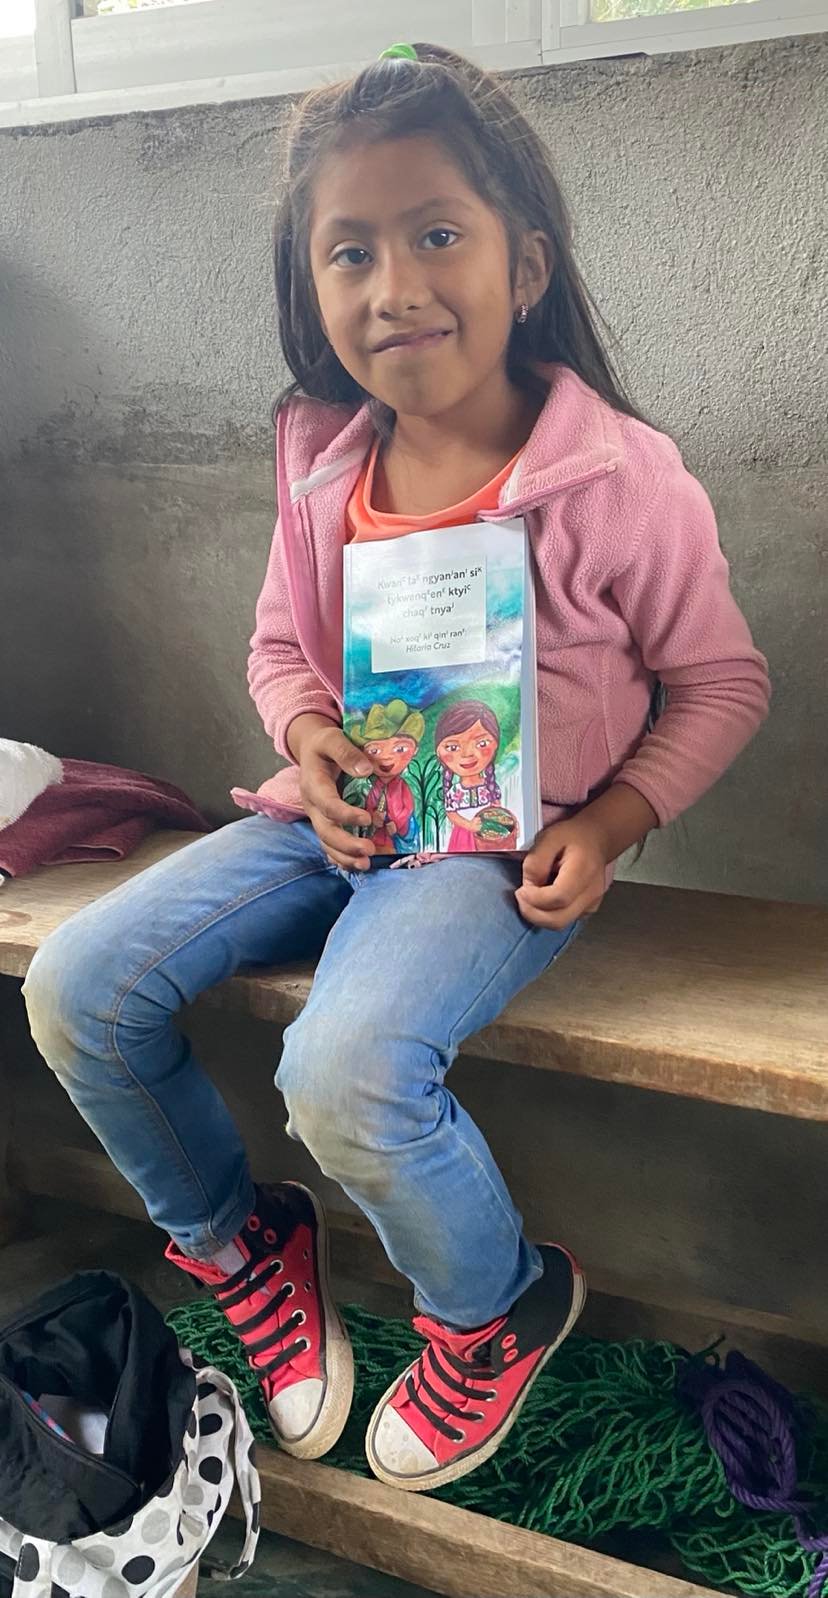 A child in Mexico holds one of the books.